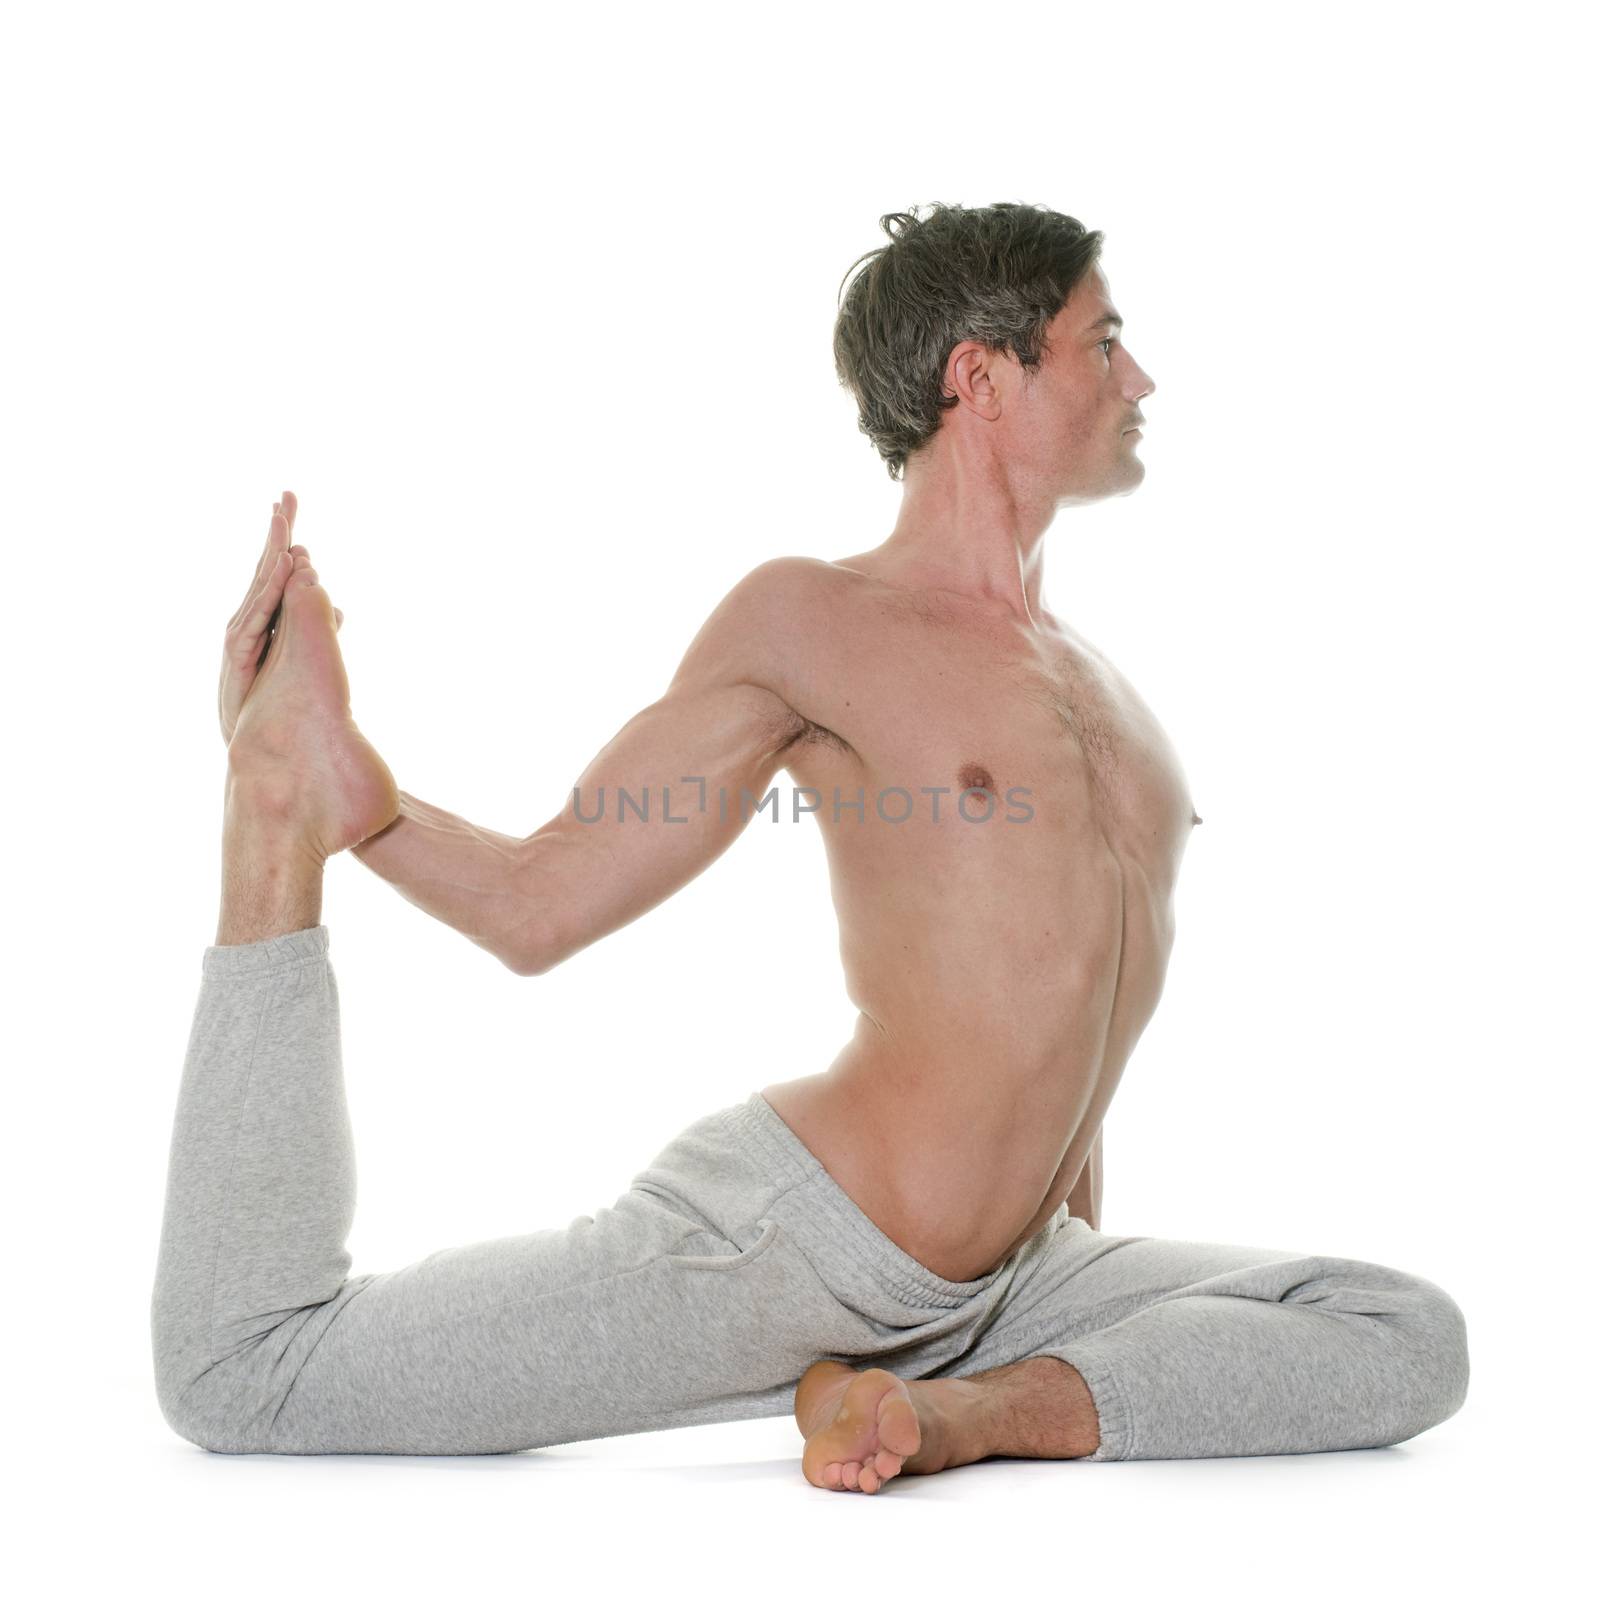 man doing yoga in front of white background